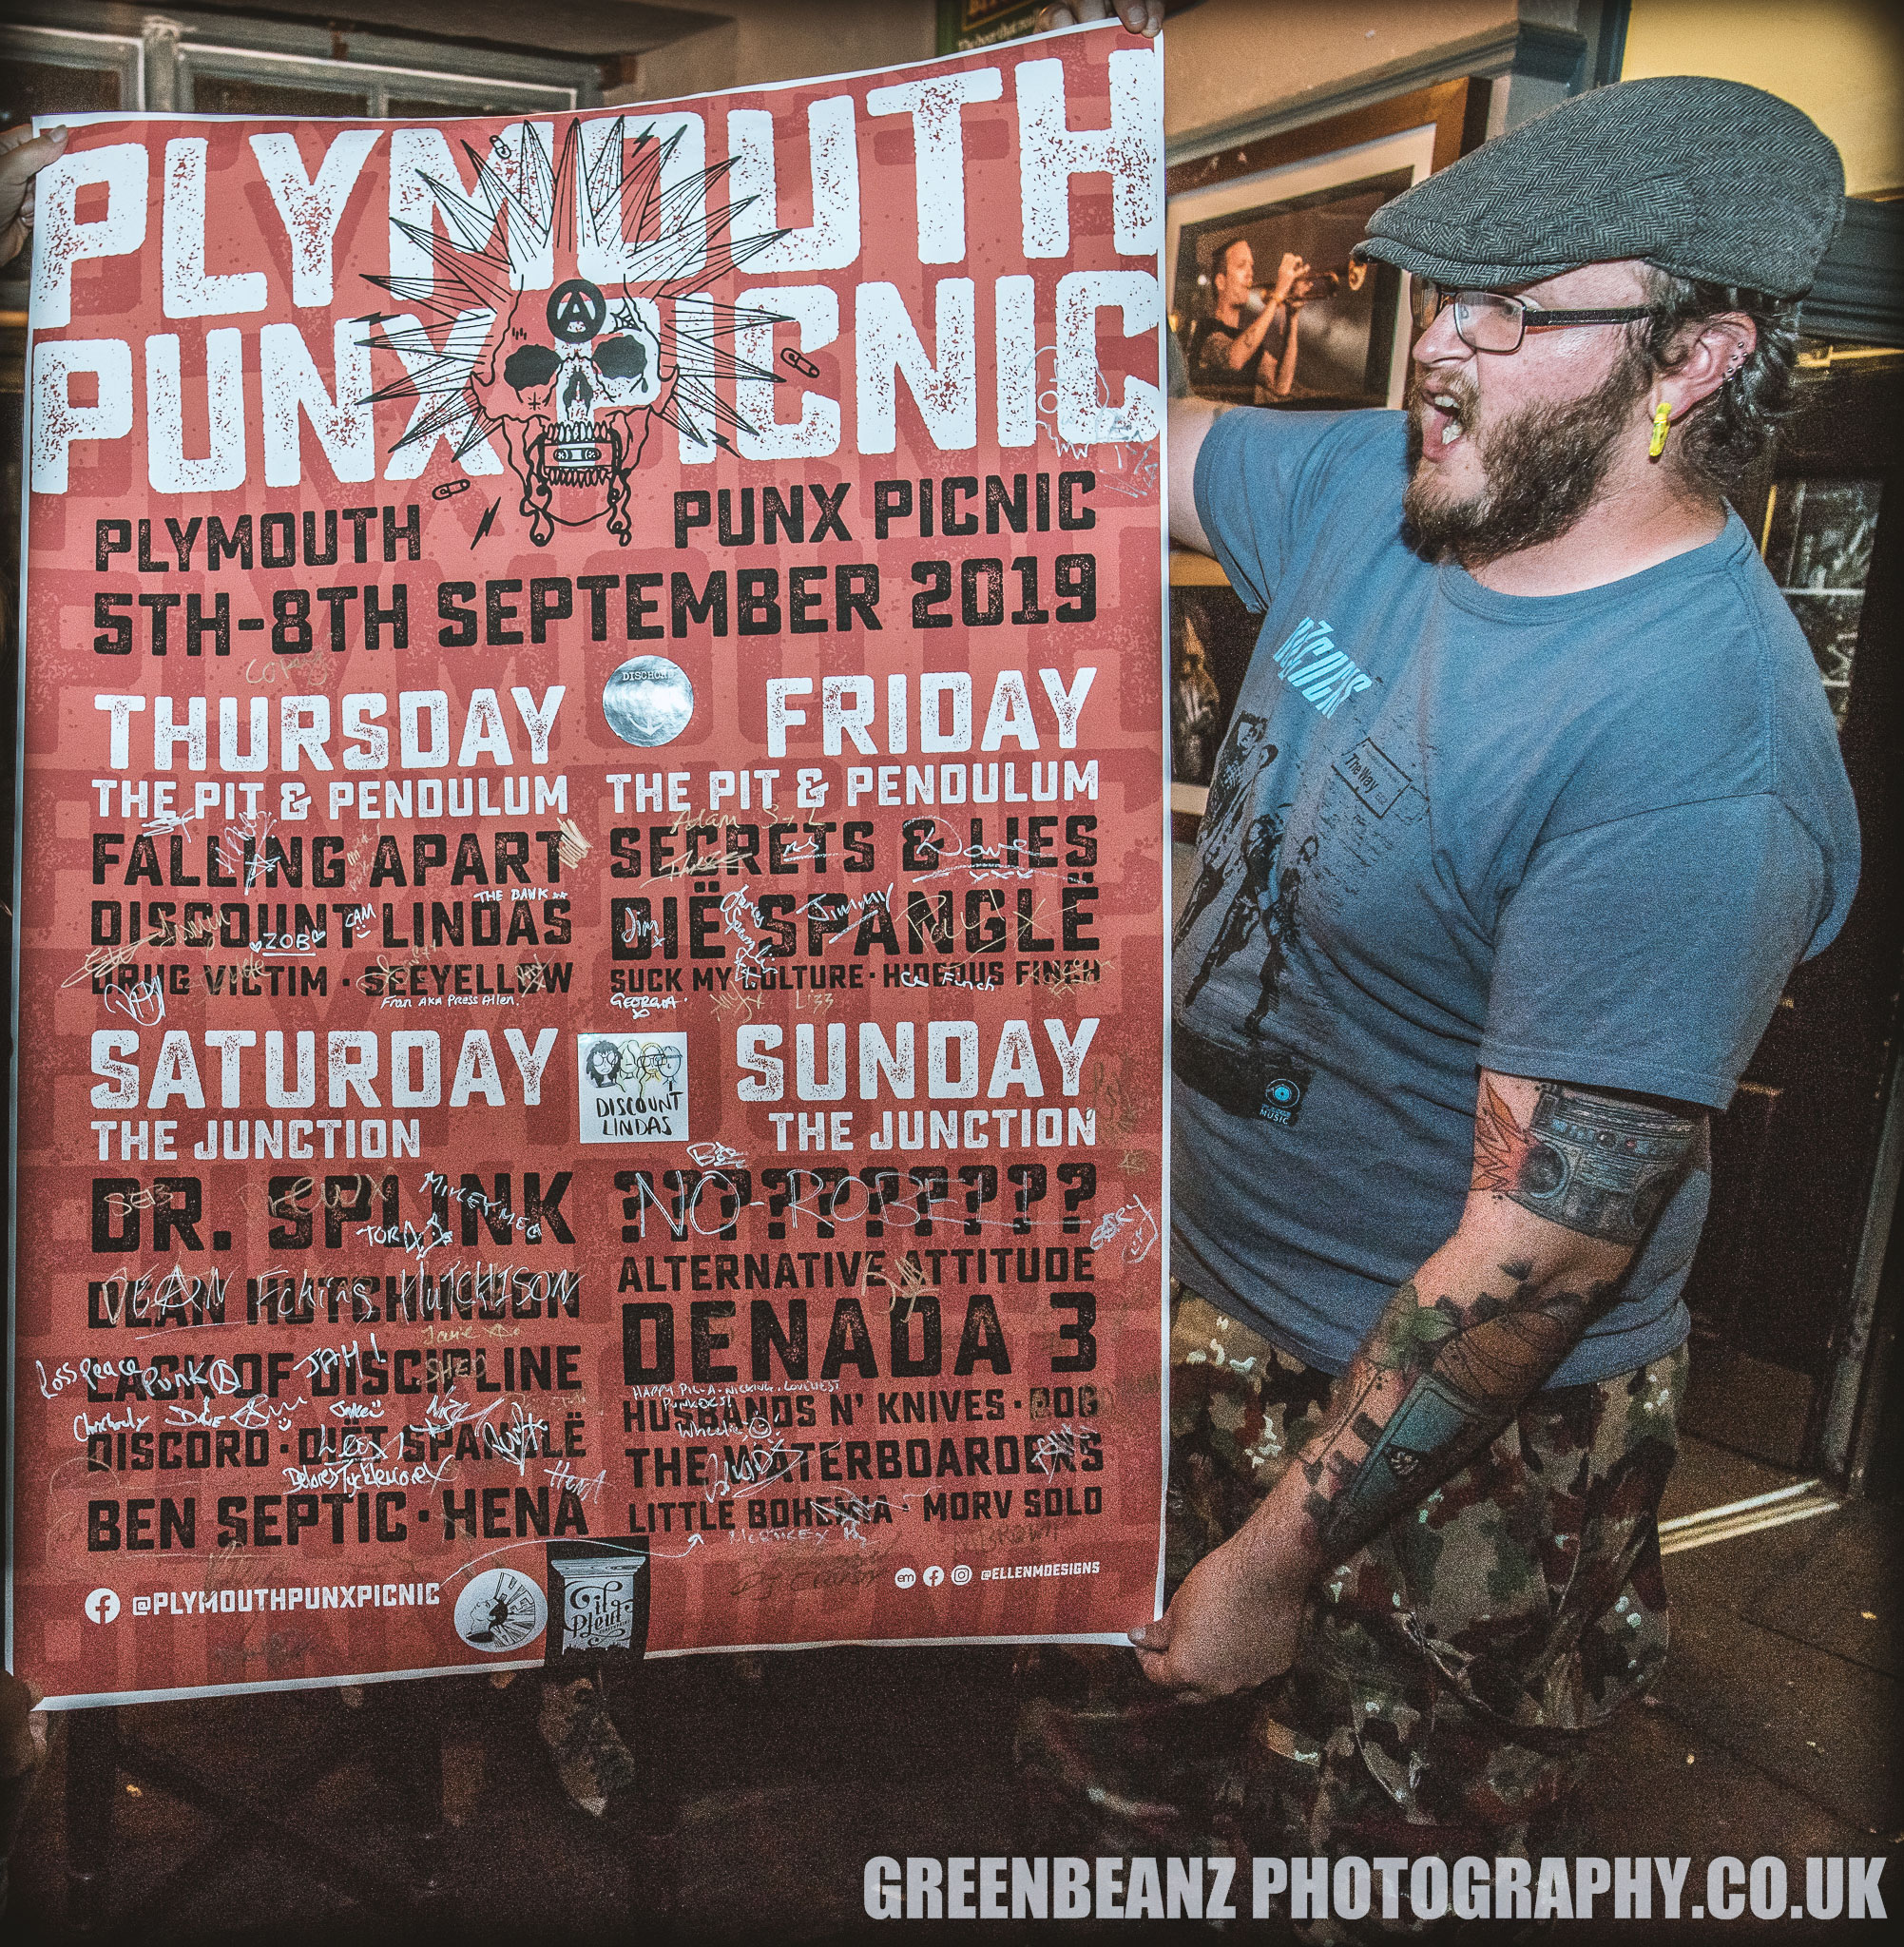 Jack Hopkins Event Organiser of 2019 's Plymouth Punx Picnic with the signed line up poster at The Junction